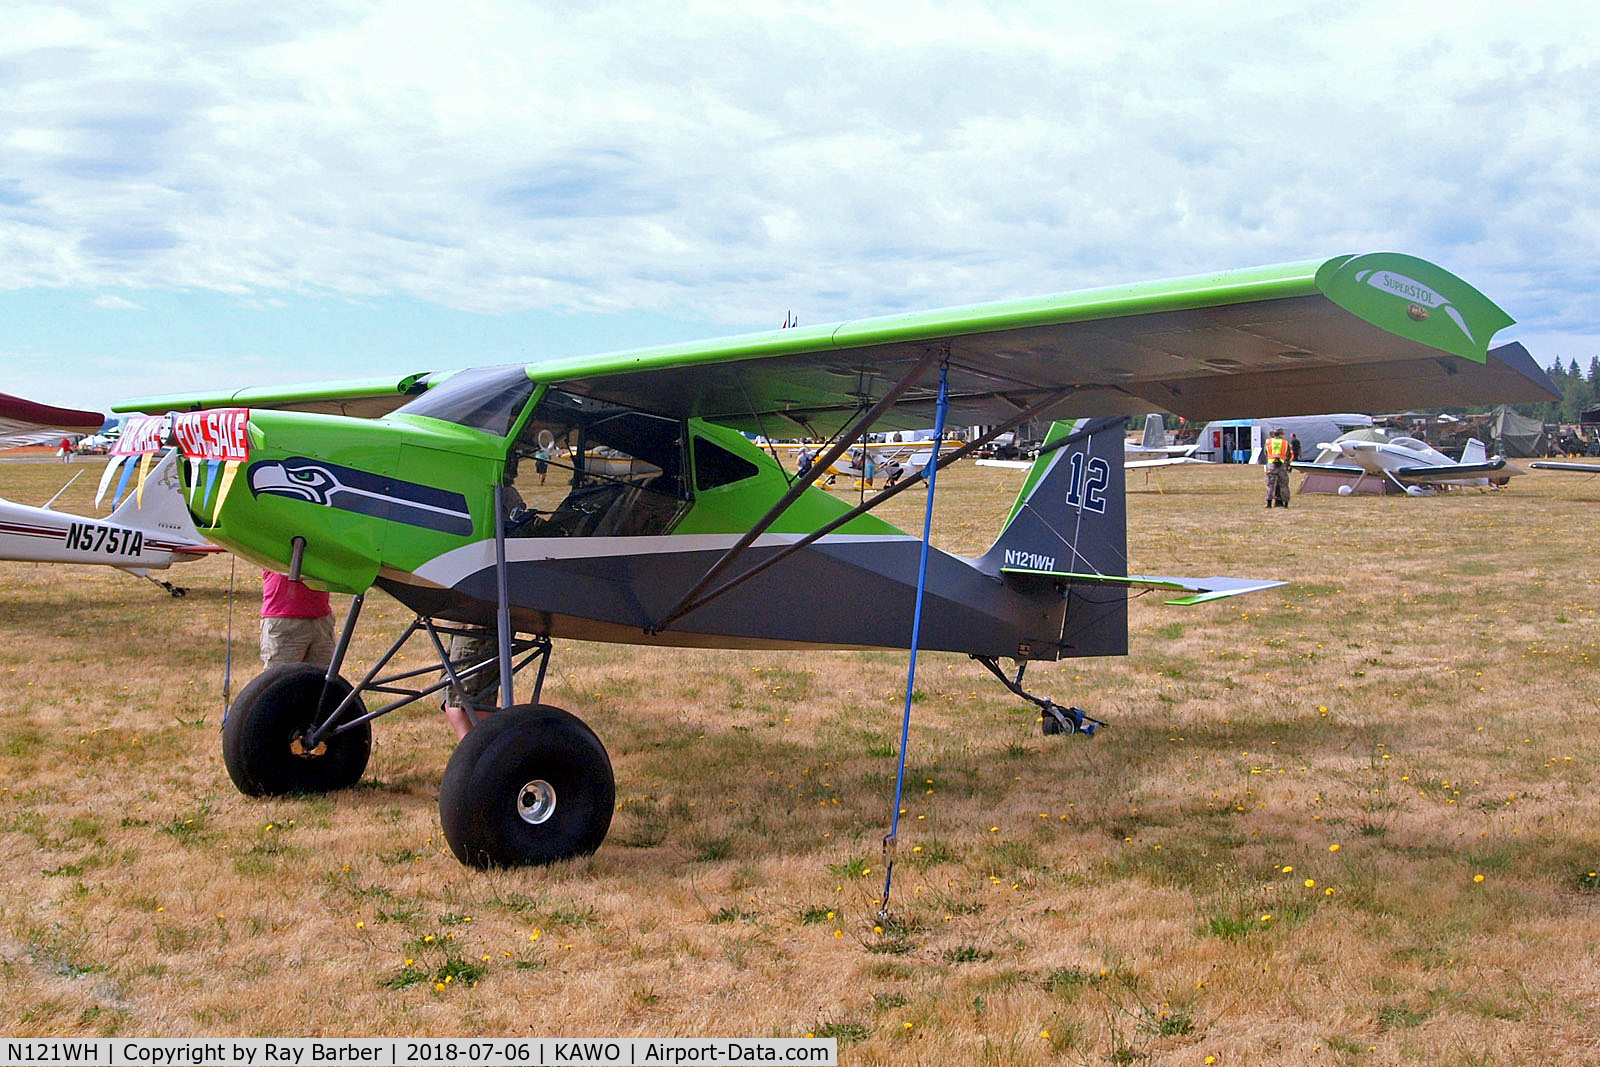 Aircraft N121WH (2014 Just Aircraft JA30 Superstol C/N JA377-05-14) Photo  by Ray Barber (Photo ID: AC1602941)